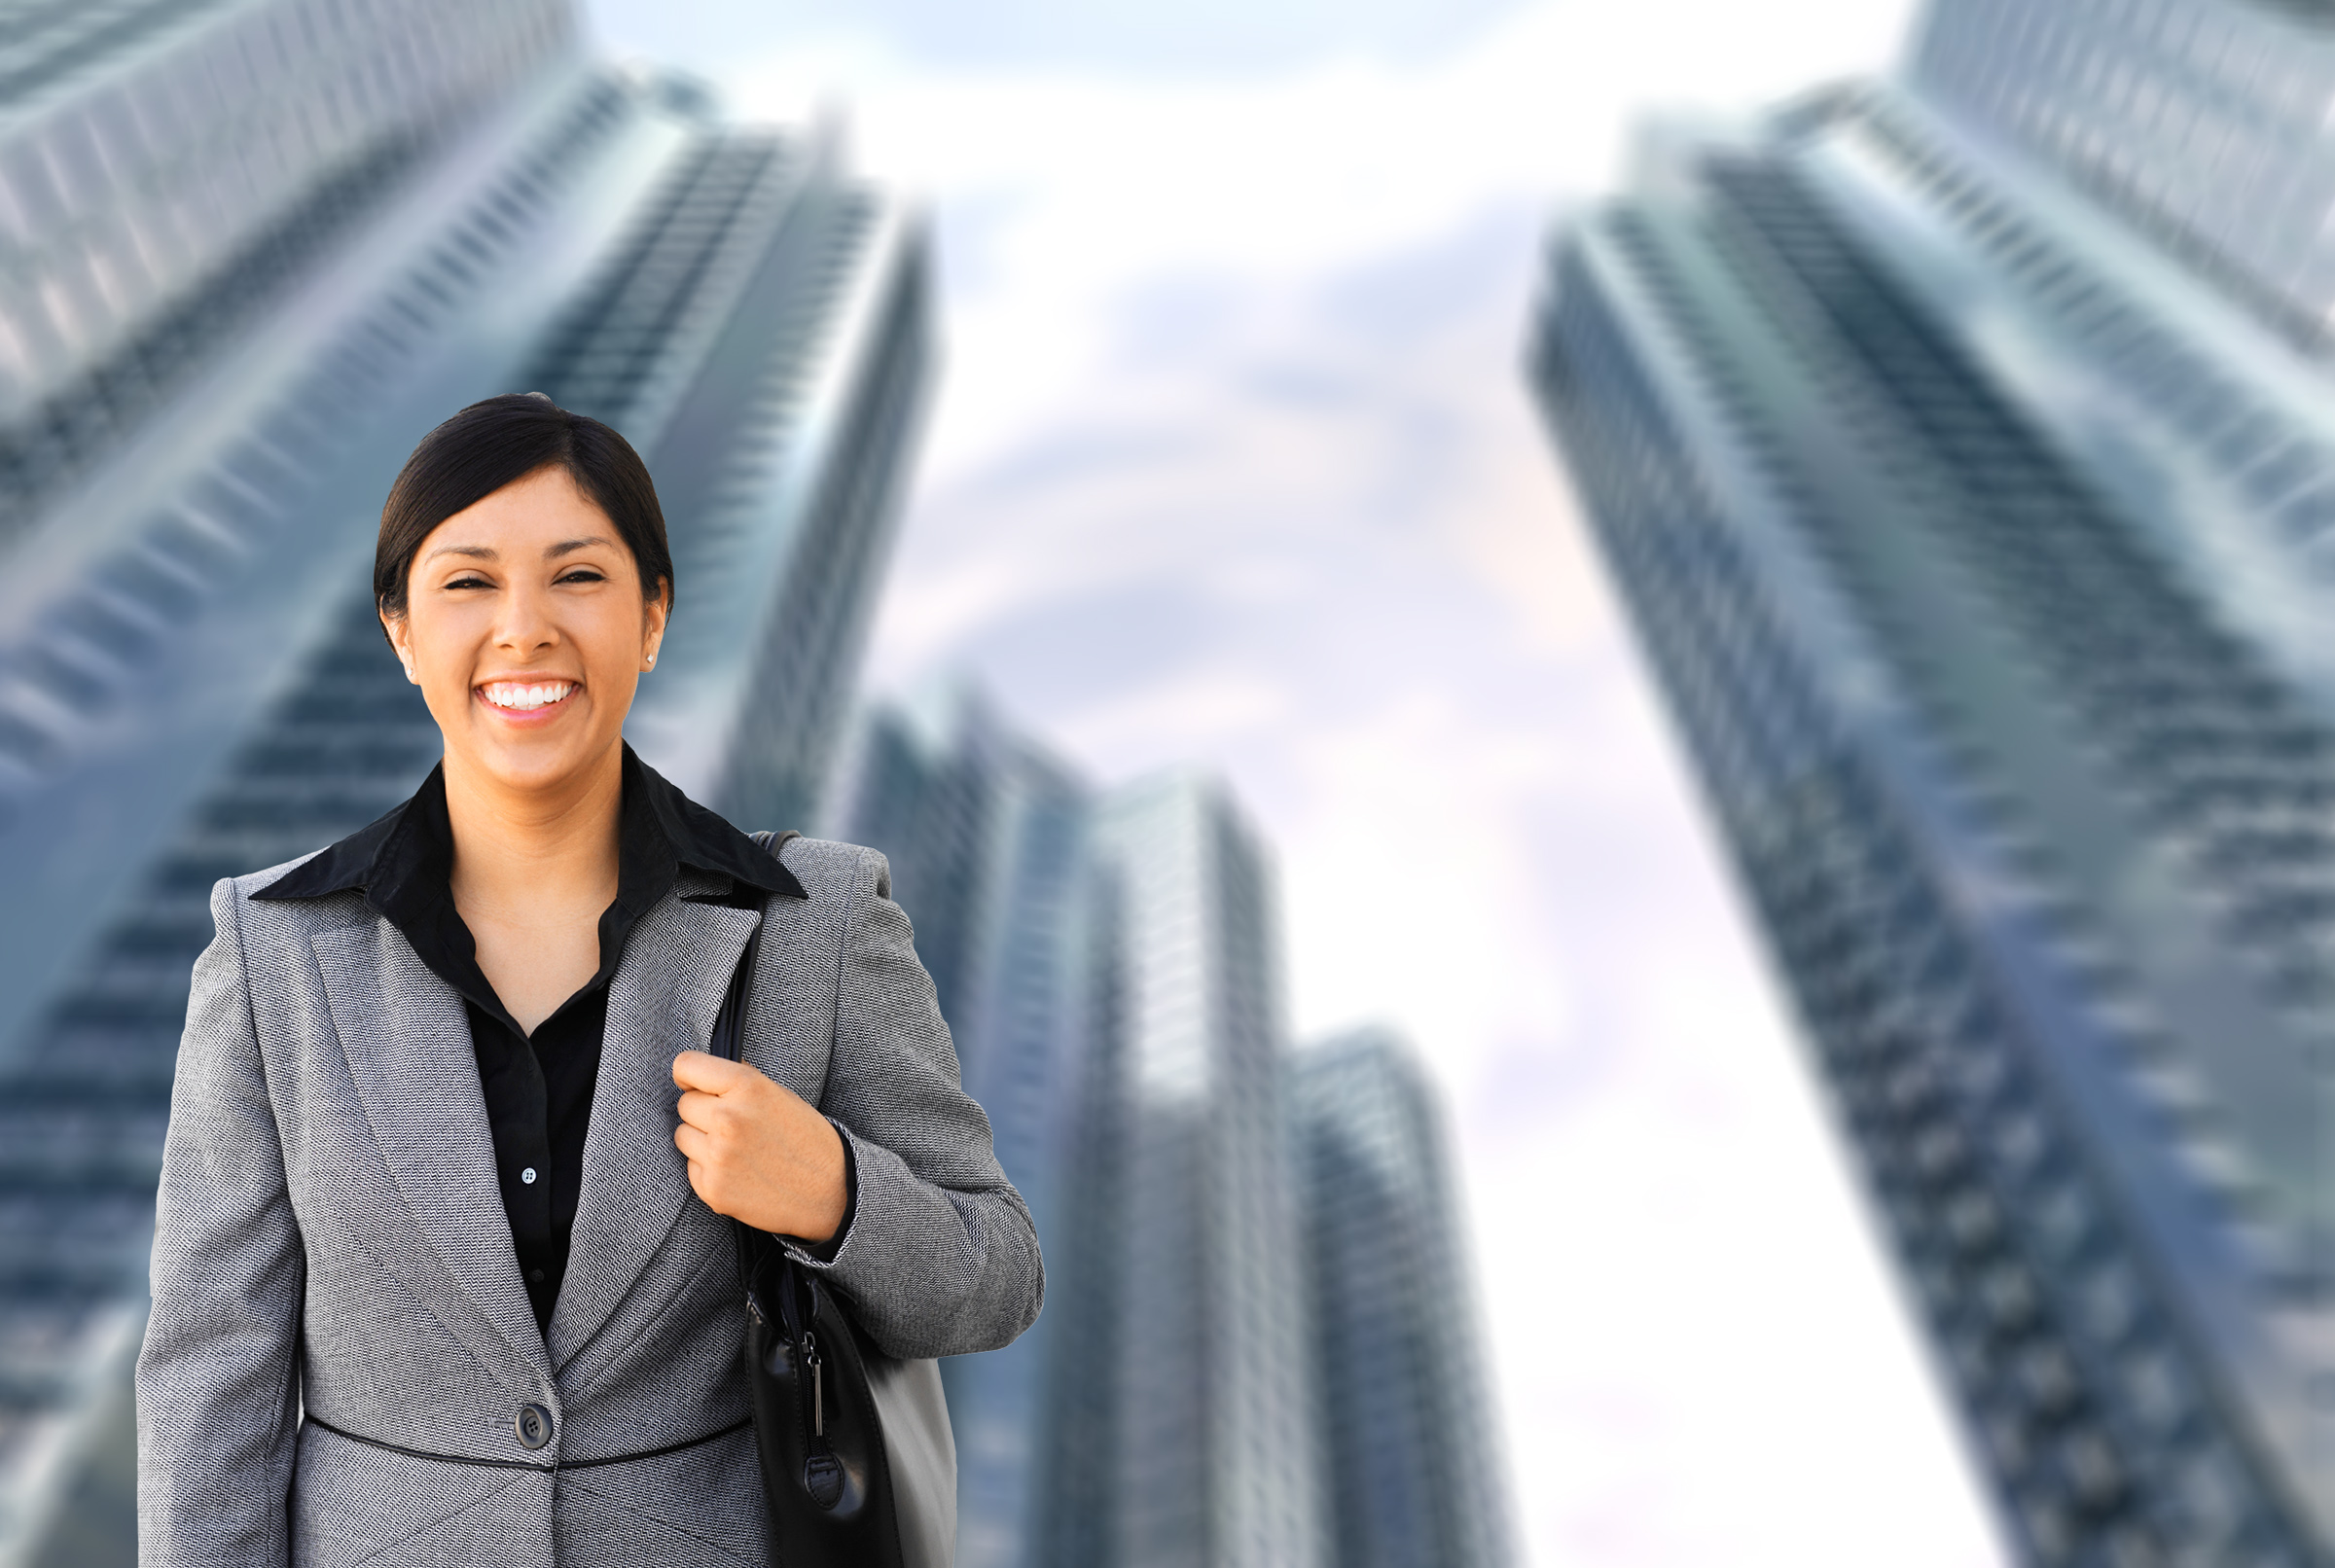 success story - confident female executive, mid forties, arms down, gray suit, black blouse, smiling, superimposed on blurred background of tall skyscrapers